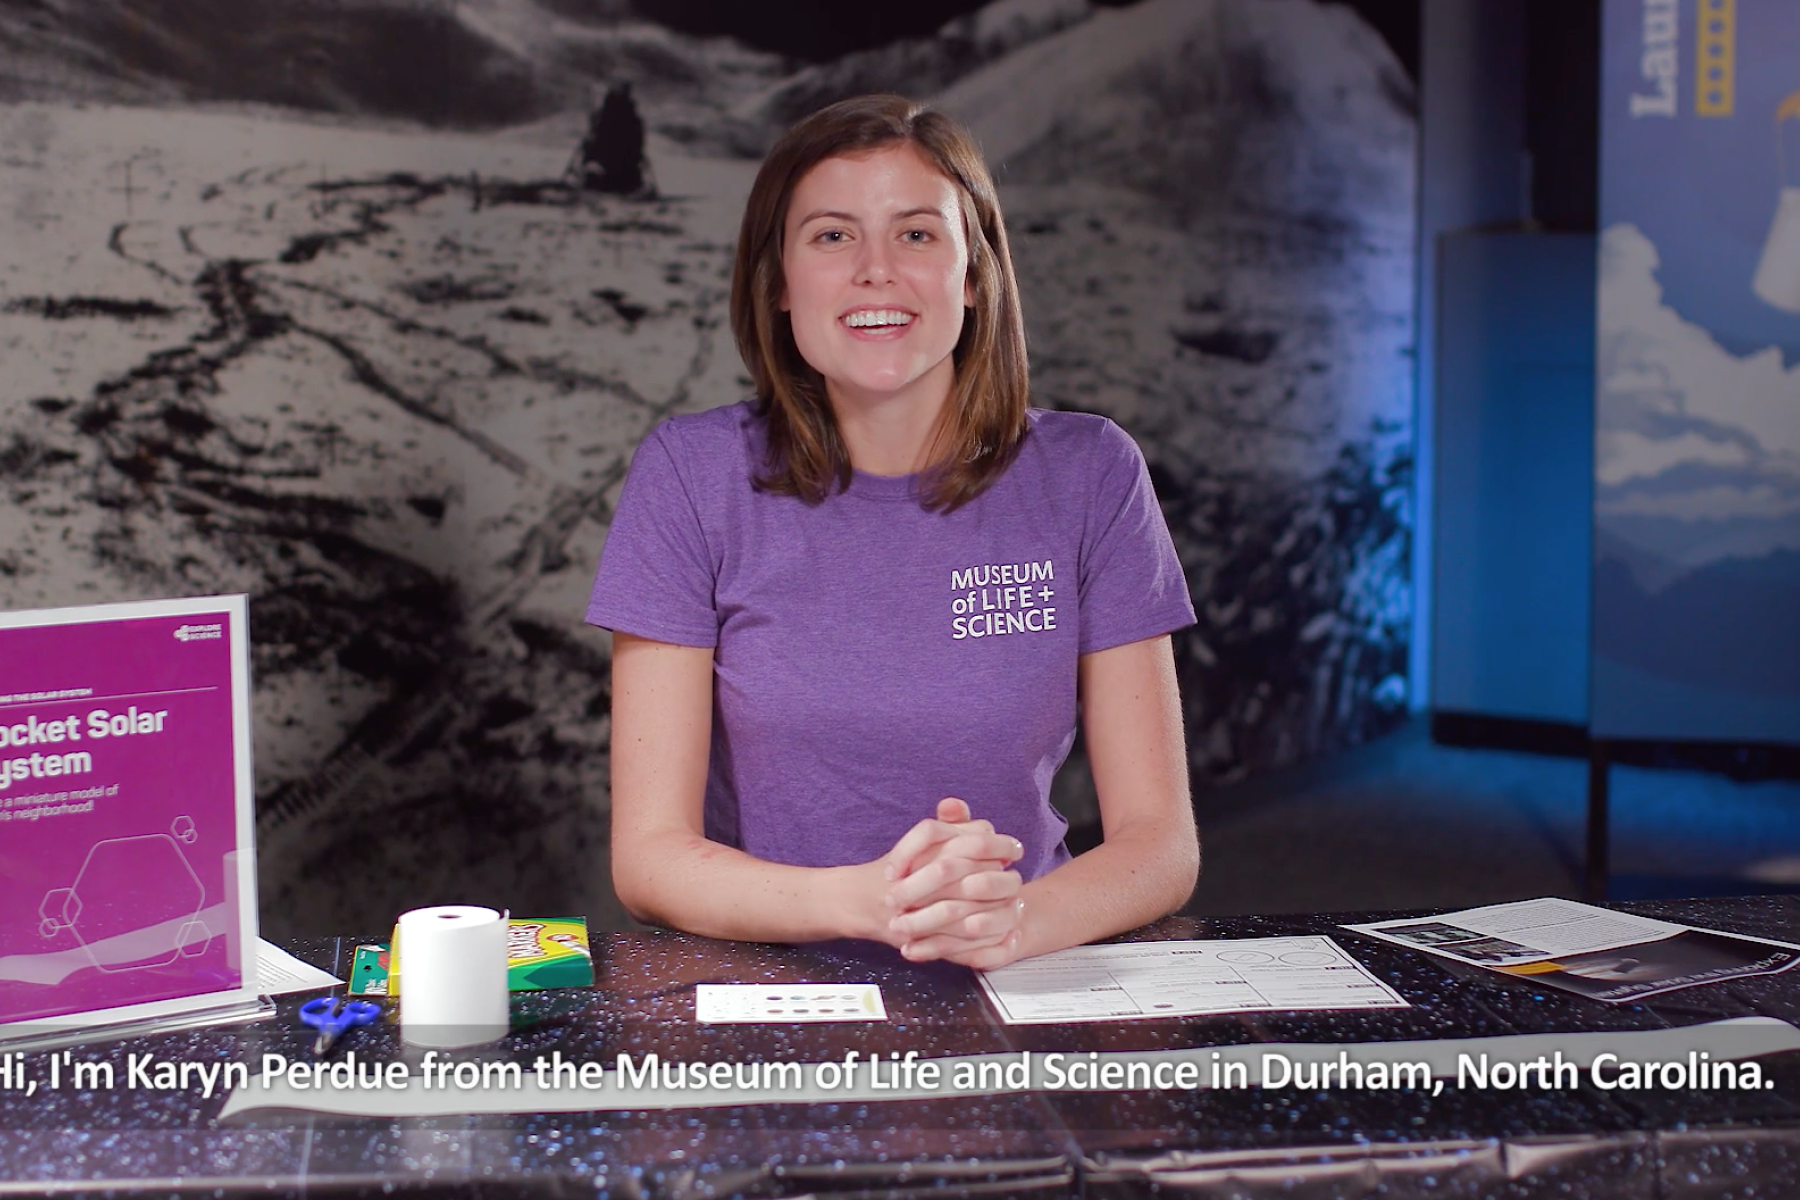 Explore Science: Earth & Space activity and content training videos